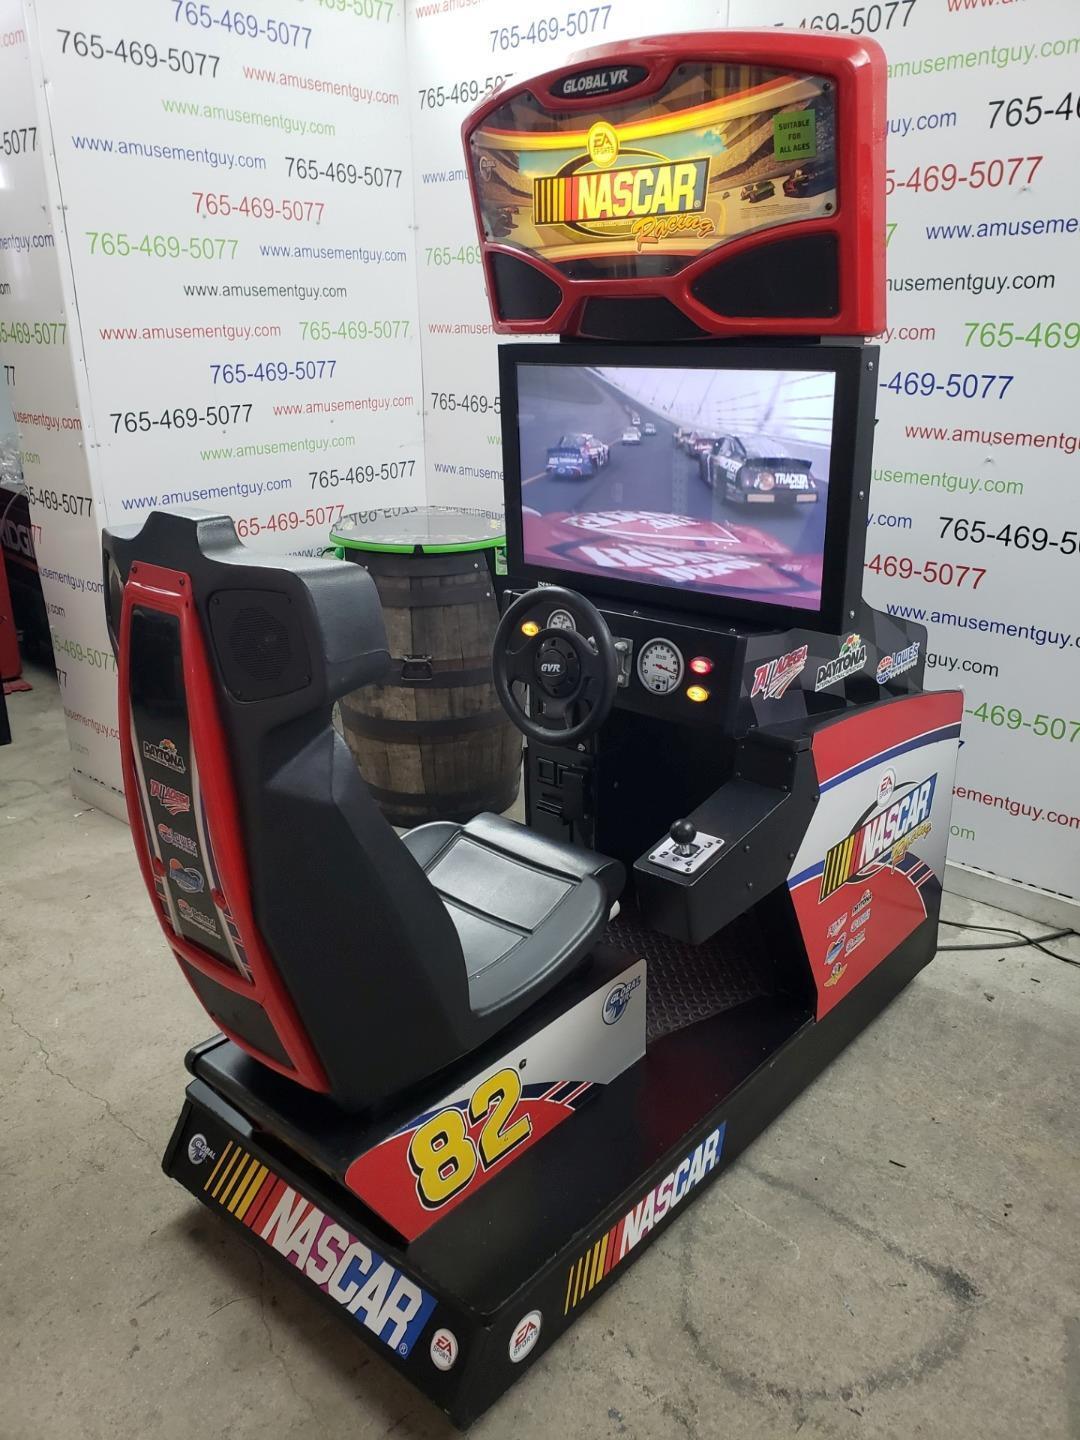 Nascar Racing by Global VR COIN-OP Sit-Down Driving Arcade Video Game